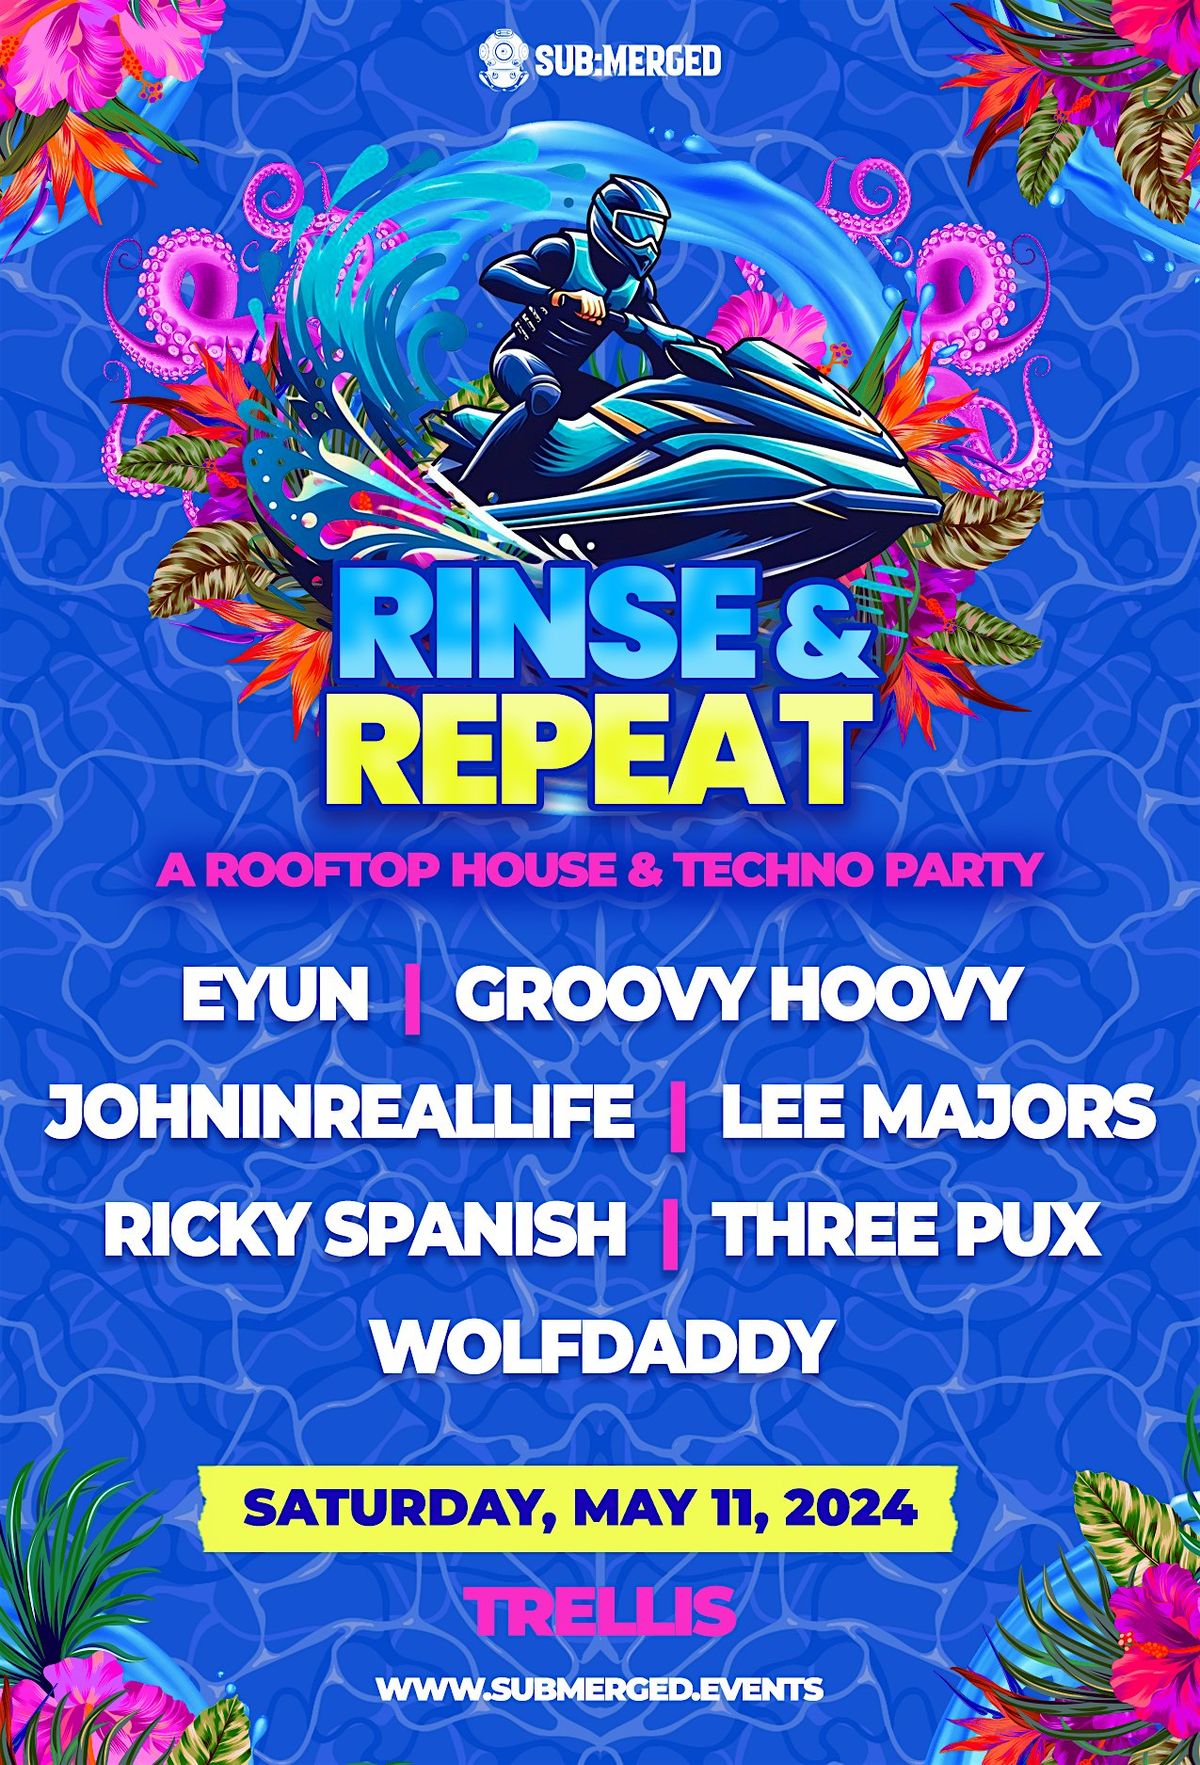 Rinse & Repeat: A Rooftop House & Techno Party